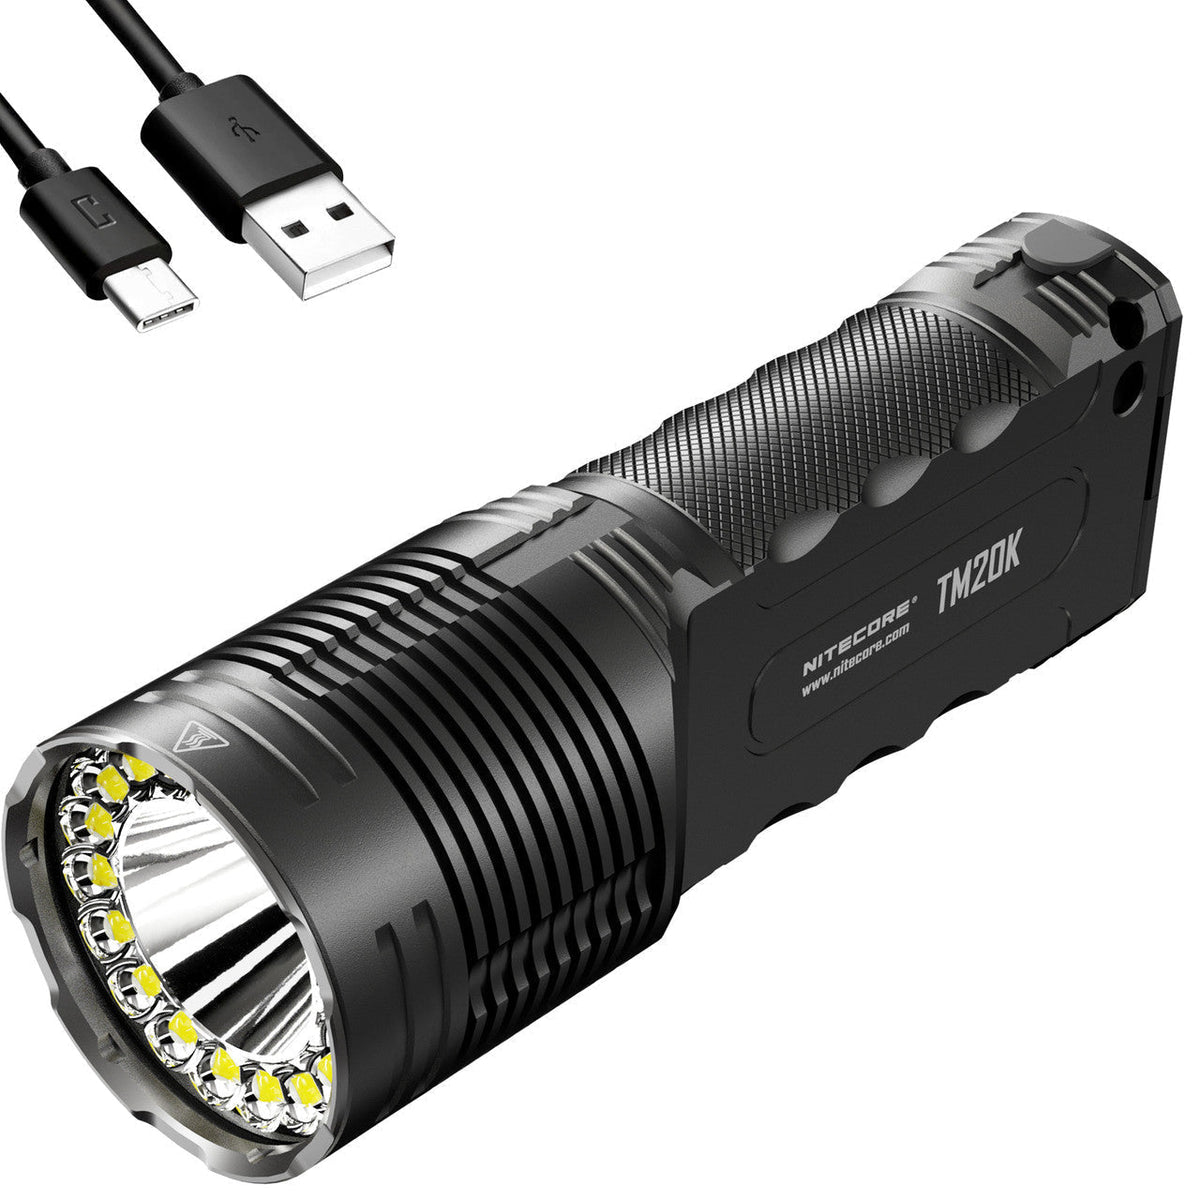 Flashlights & Headlamps - Nitecore TM20K Tiny Monster Tactical Searchlight (20,000 Lumens | Rechargeable)